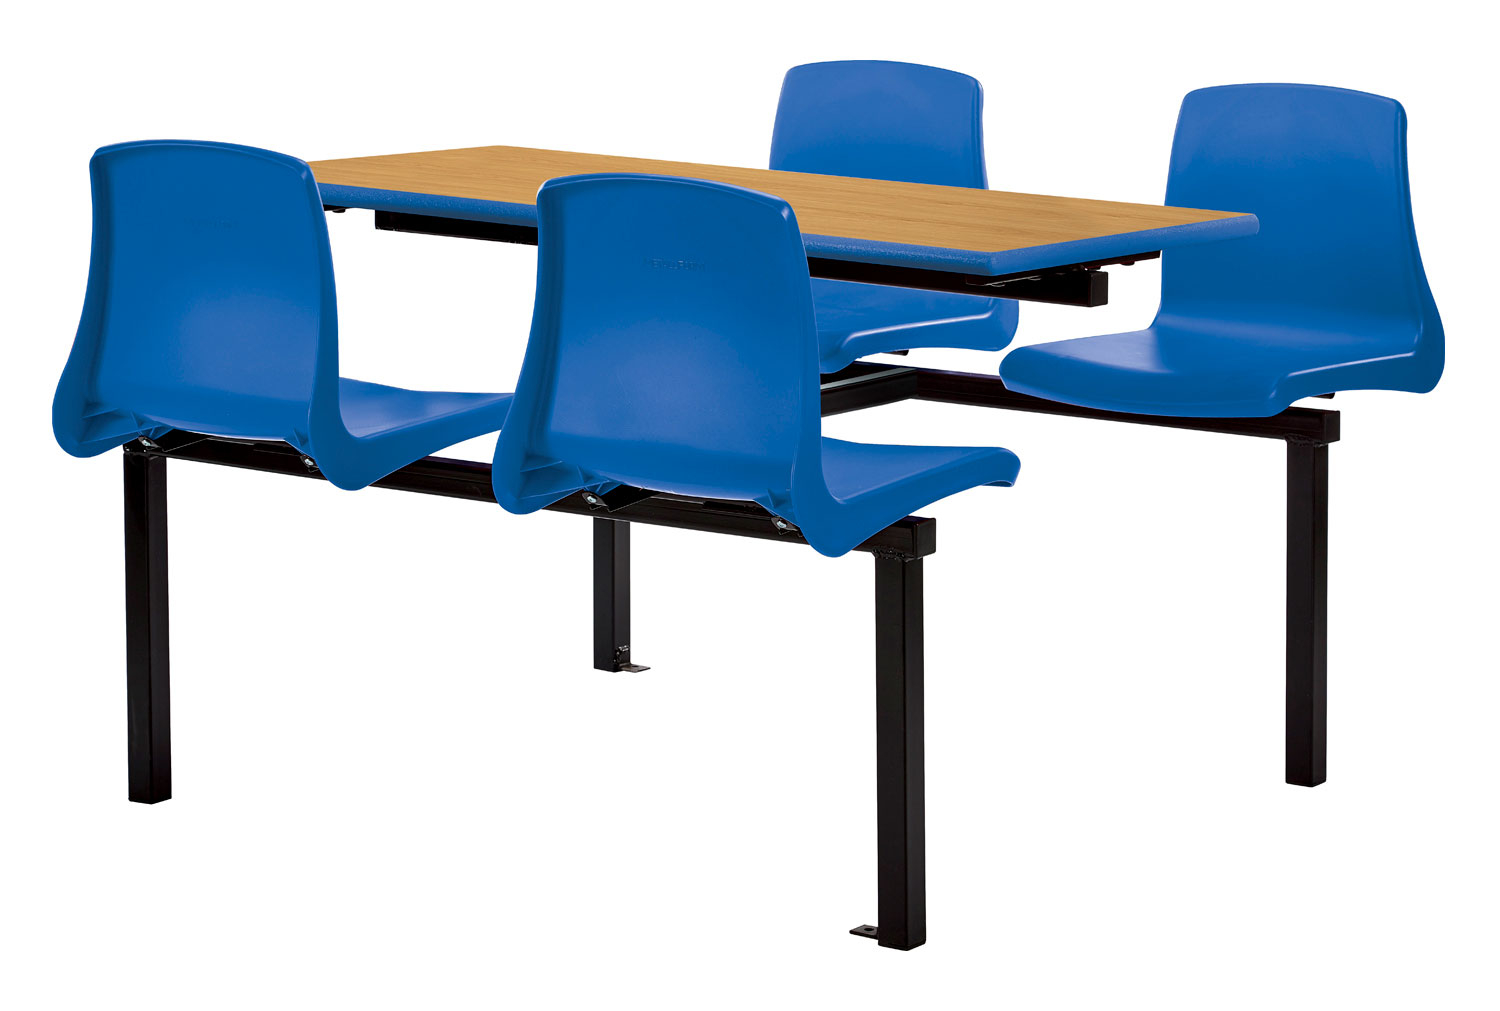 Metalliform 4 Seater Canteen Table & NP Classroom Chairs (Black Frame), Double Entry, Beech Top, Blue Seats